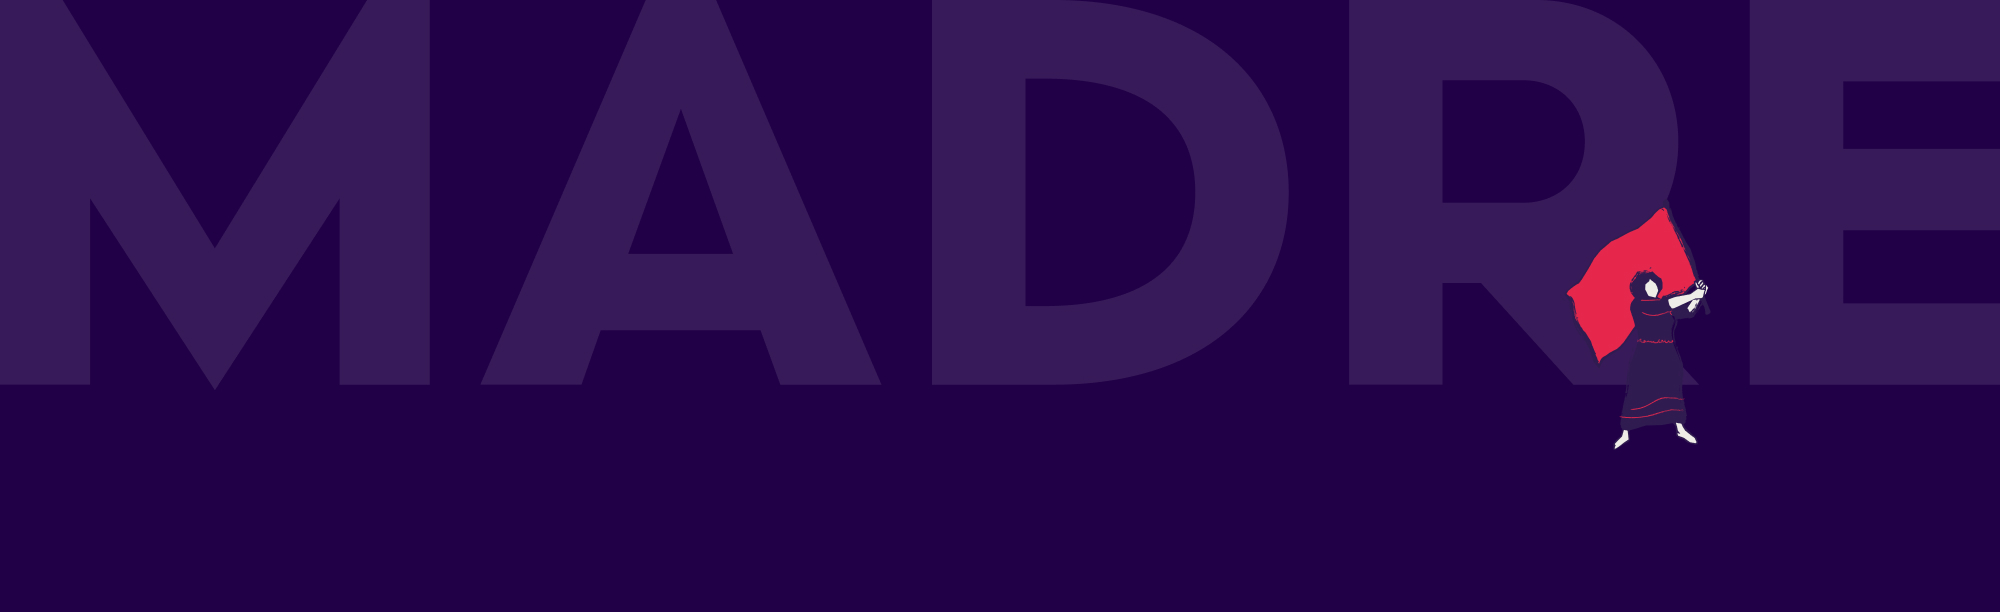 The MADRE logo sits on a dark purple background and looks as if it is faded into it; a graphic silhouette of a feminist waving a hot pink flag sits on top of the logo